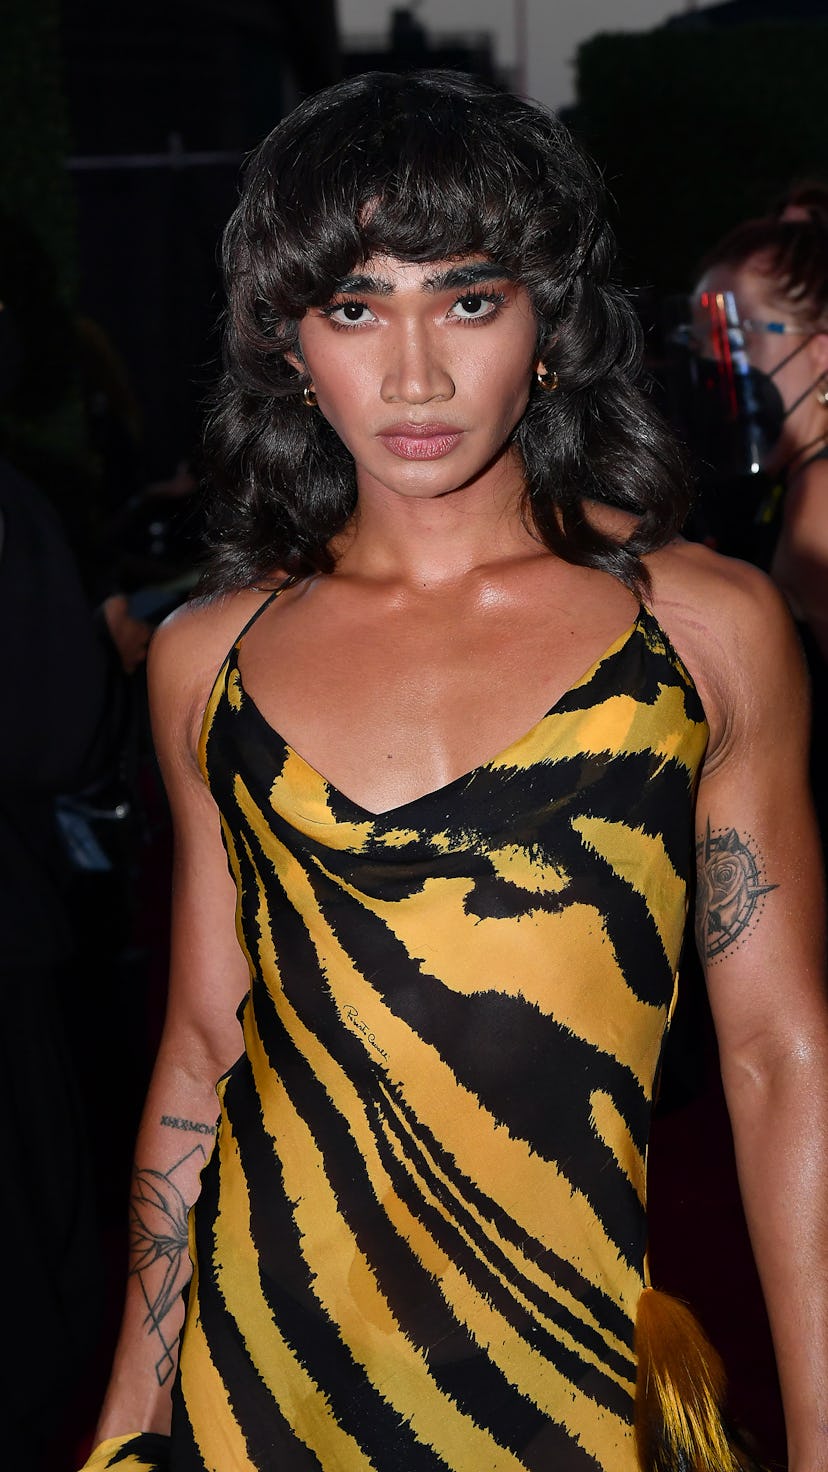 Bretman Rock with bronzy makeup at the 2021 MTV Video Music Awards.